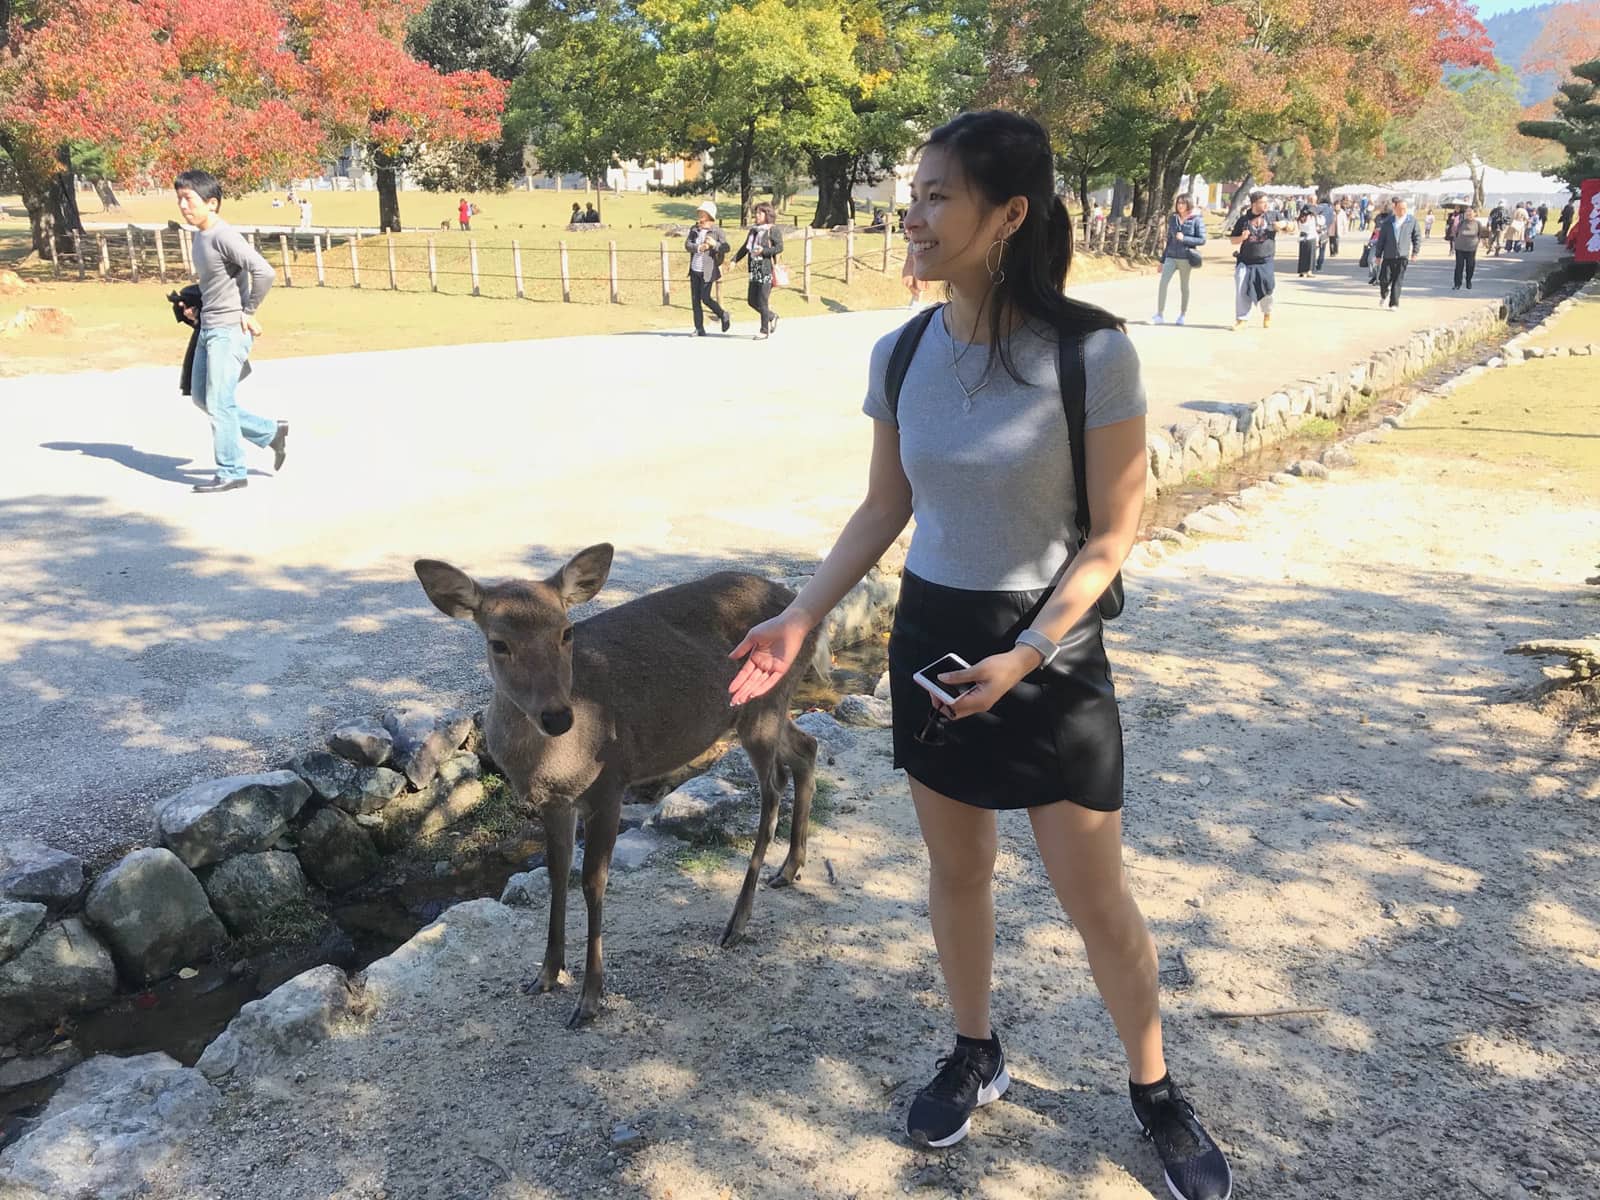 A woman in a grey t-shirt, black skirt and running shoes, standing next to a deer, obviously posing and smiling but not looking at the camera